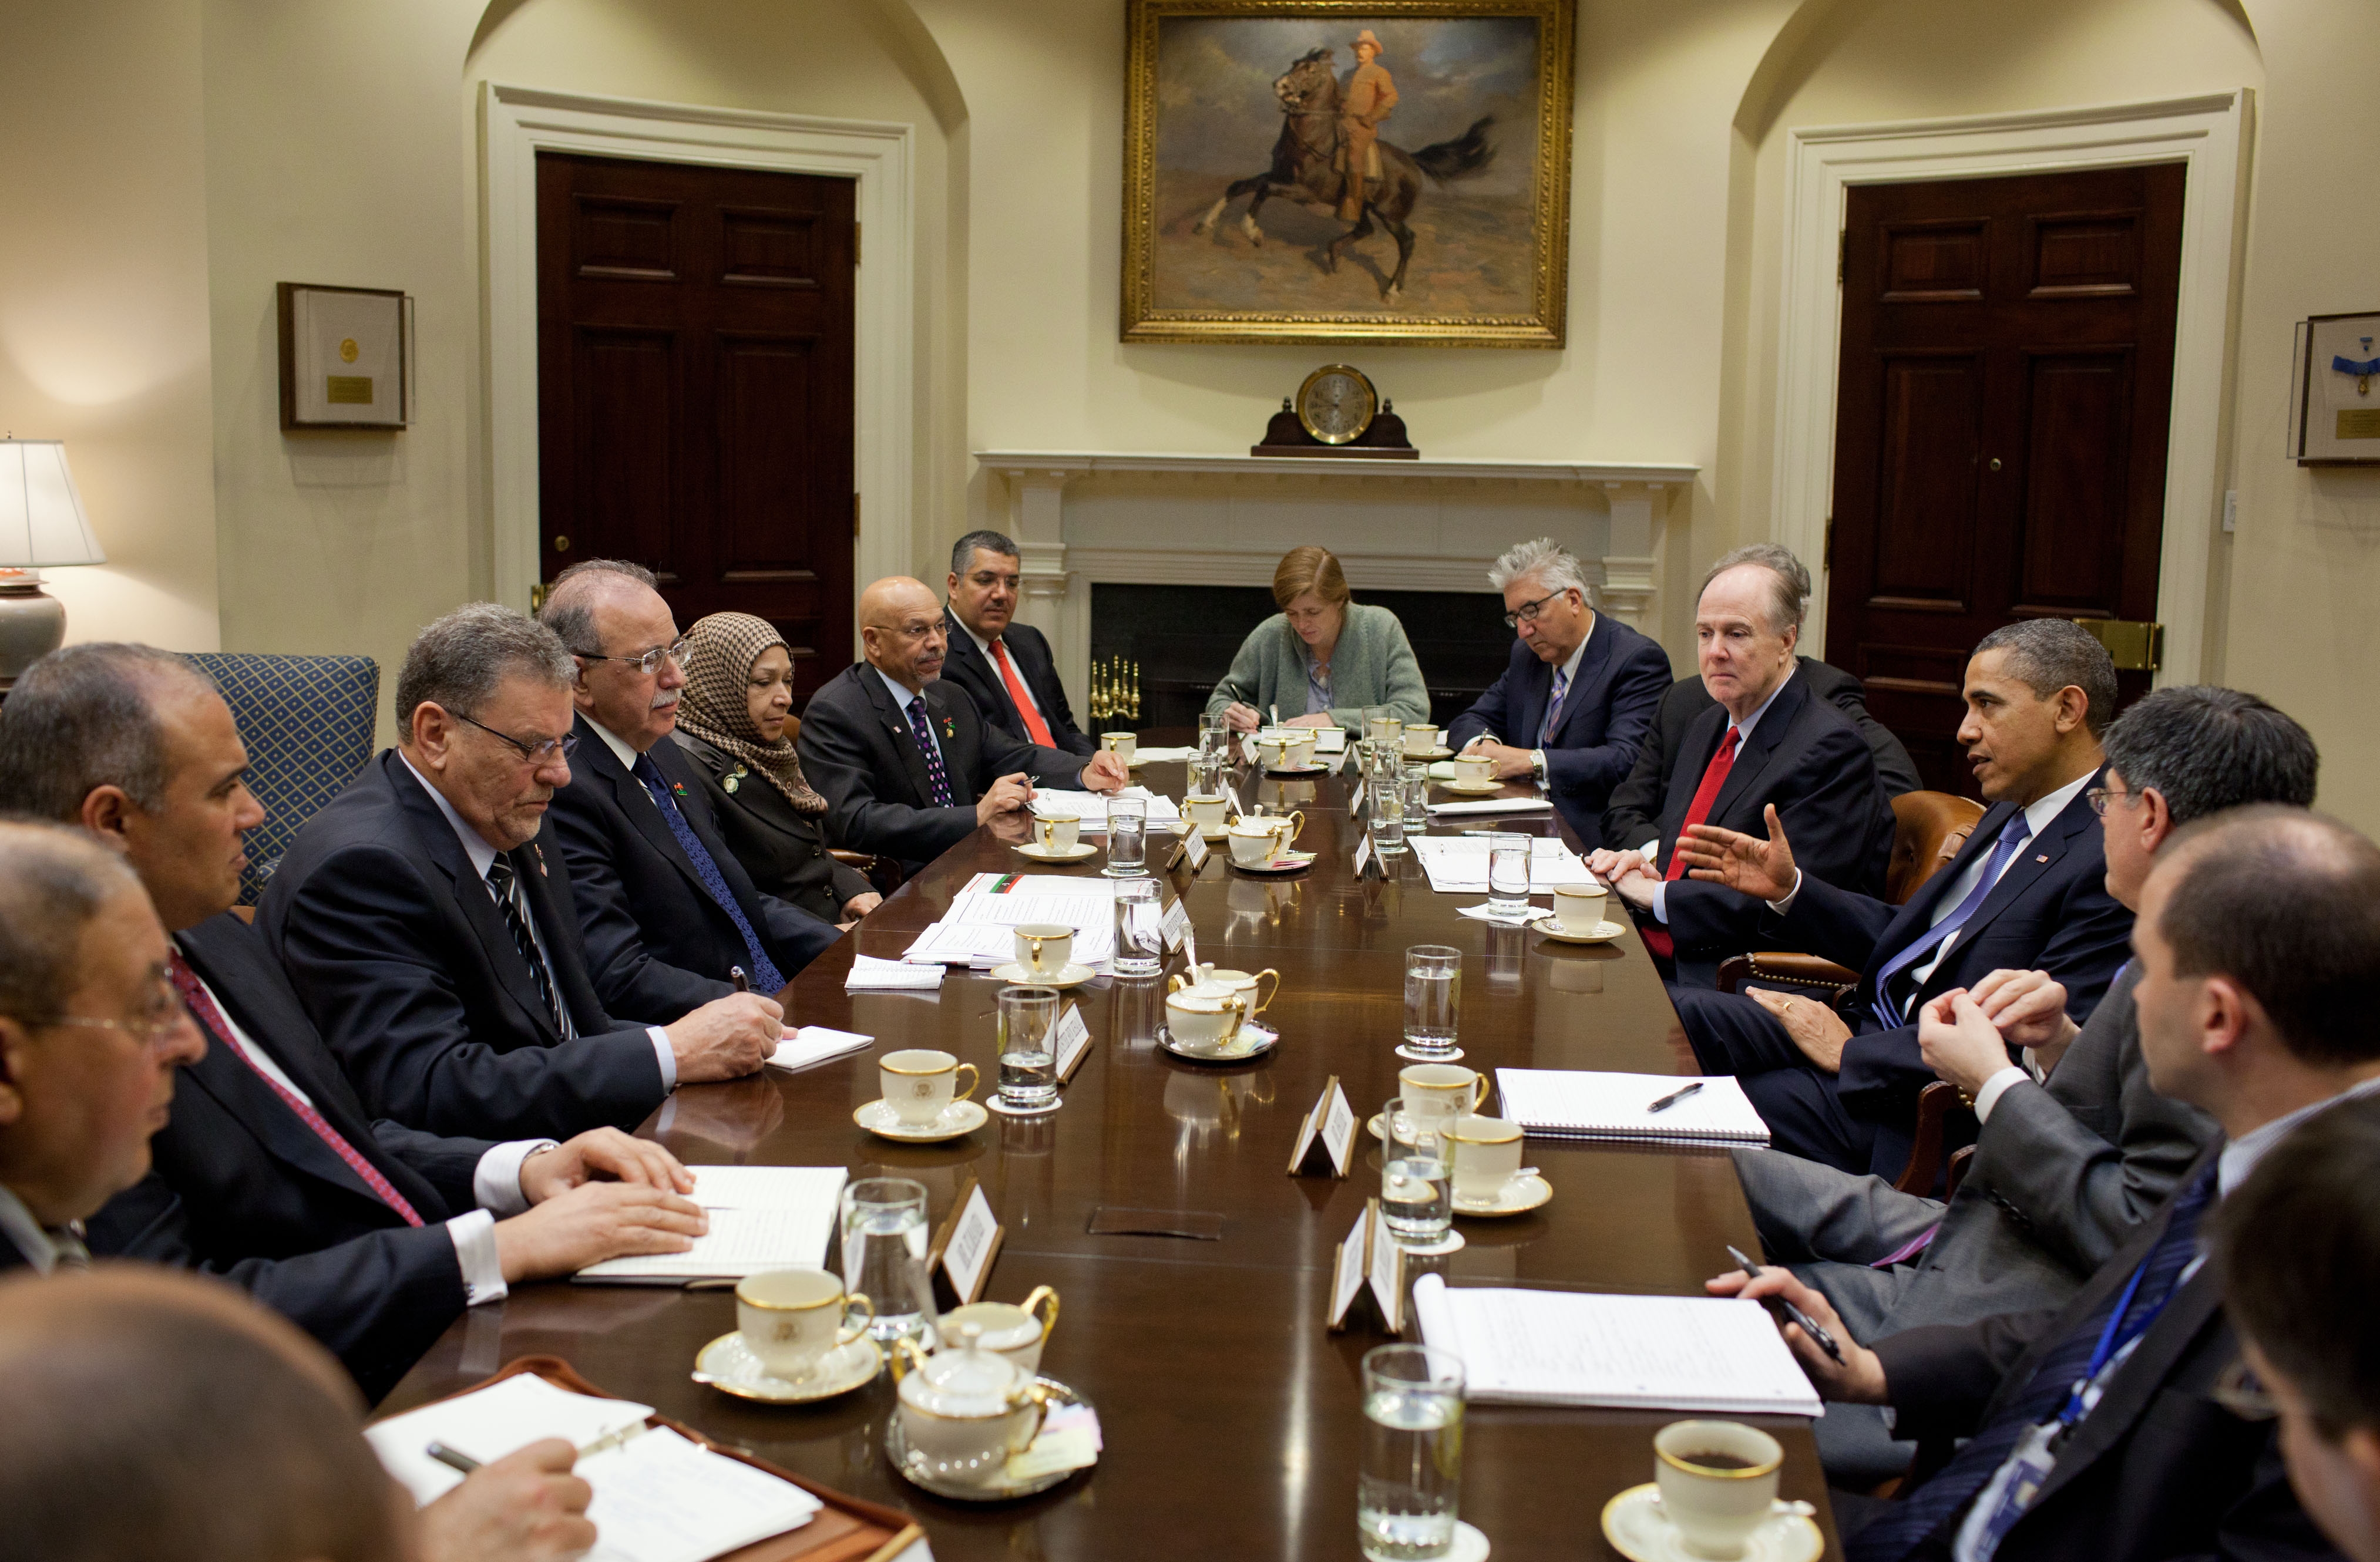 President Barack Obama meets with Prime Minister Dr. Abdurrahim ElKeib of Libya in the Roosevelt Room of the White House